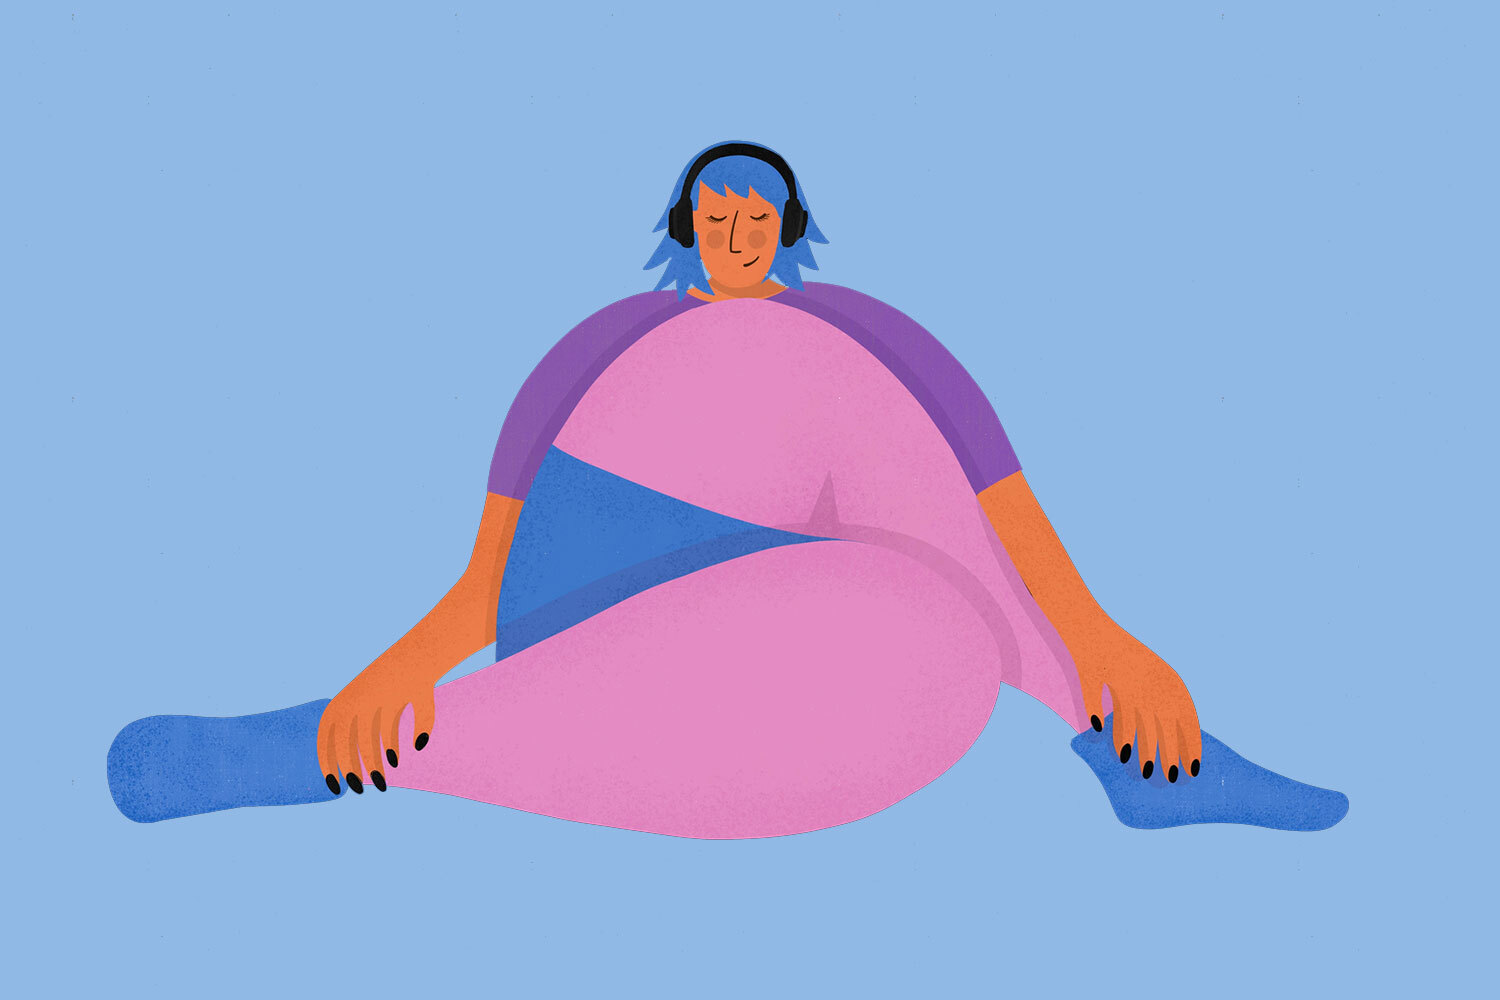 An illustration of a woman sitting cross legged in a colourful outfit